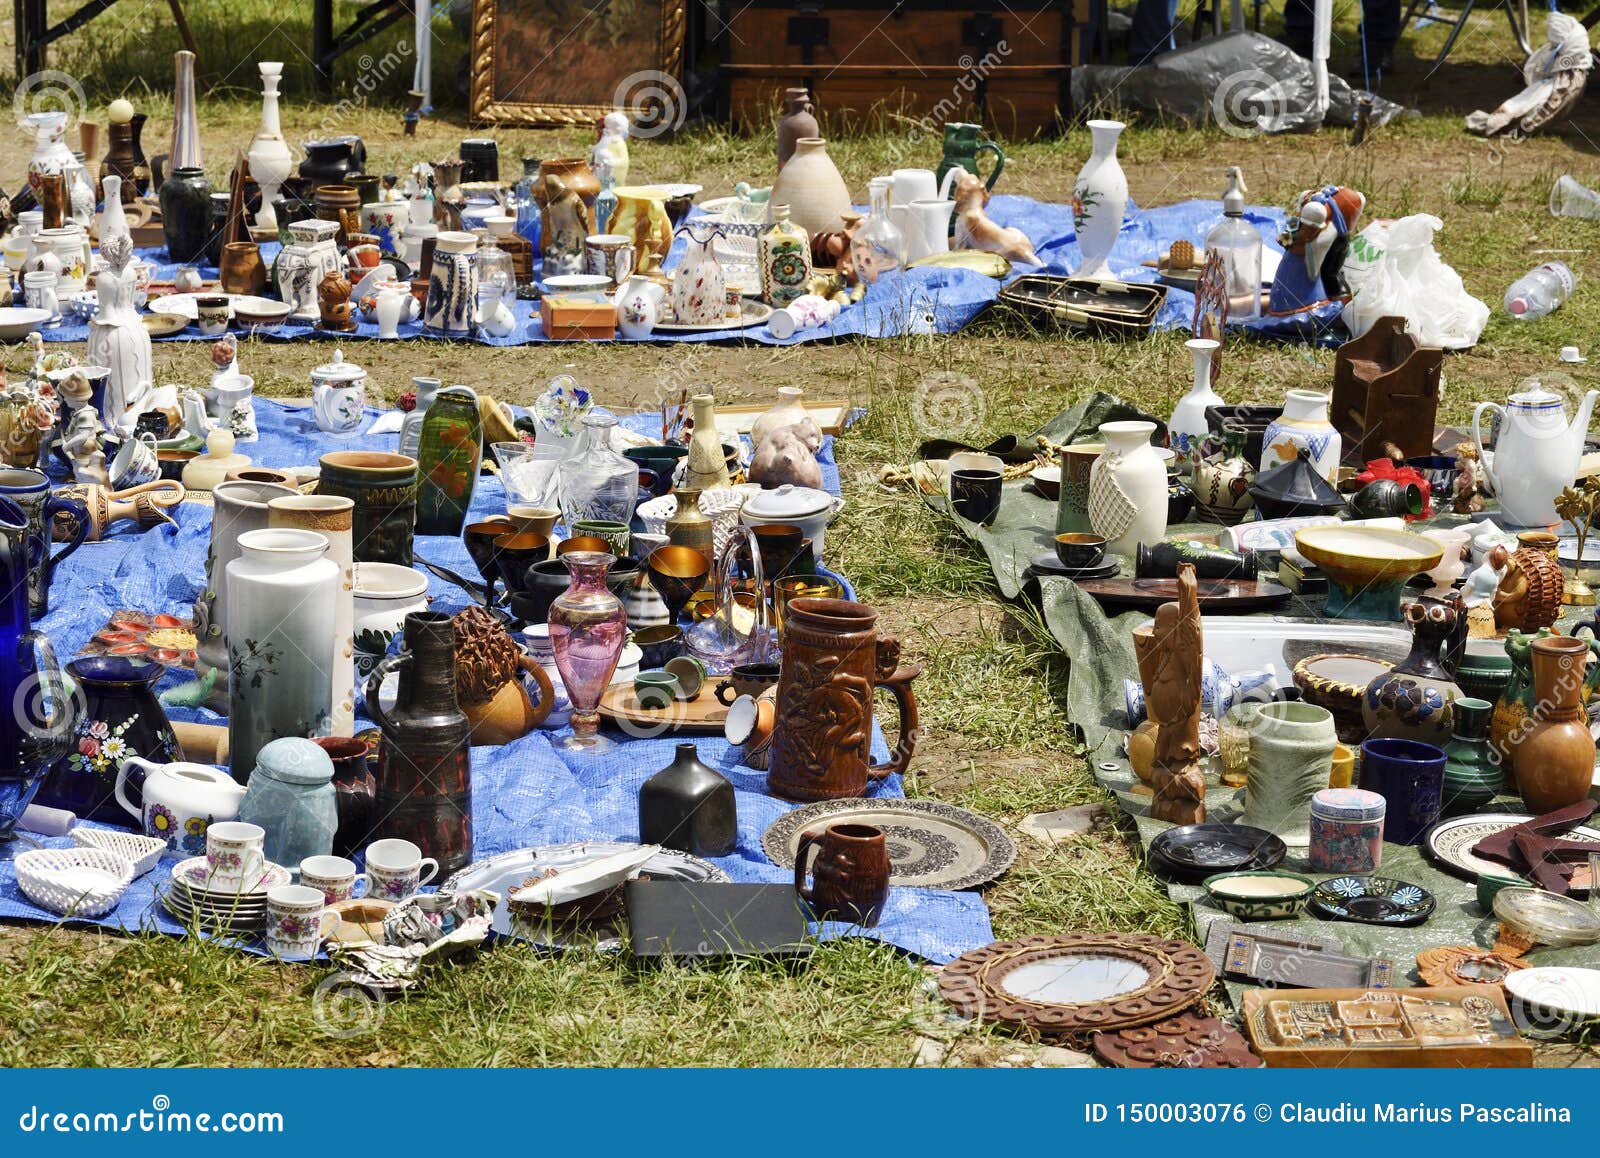 Old Things For Sale On The Flea Market Stock Photo Image Of